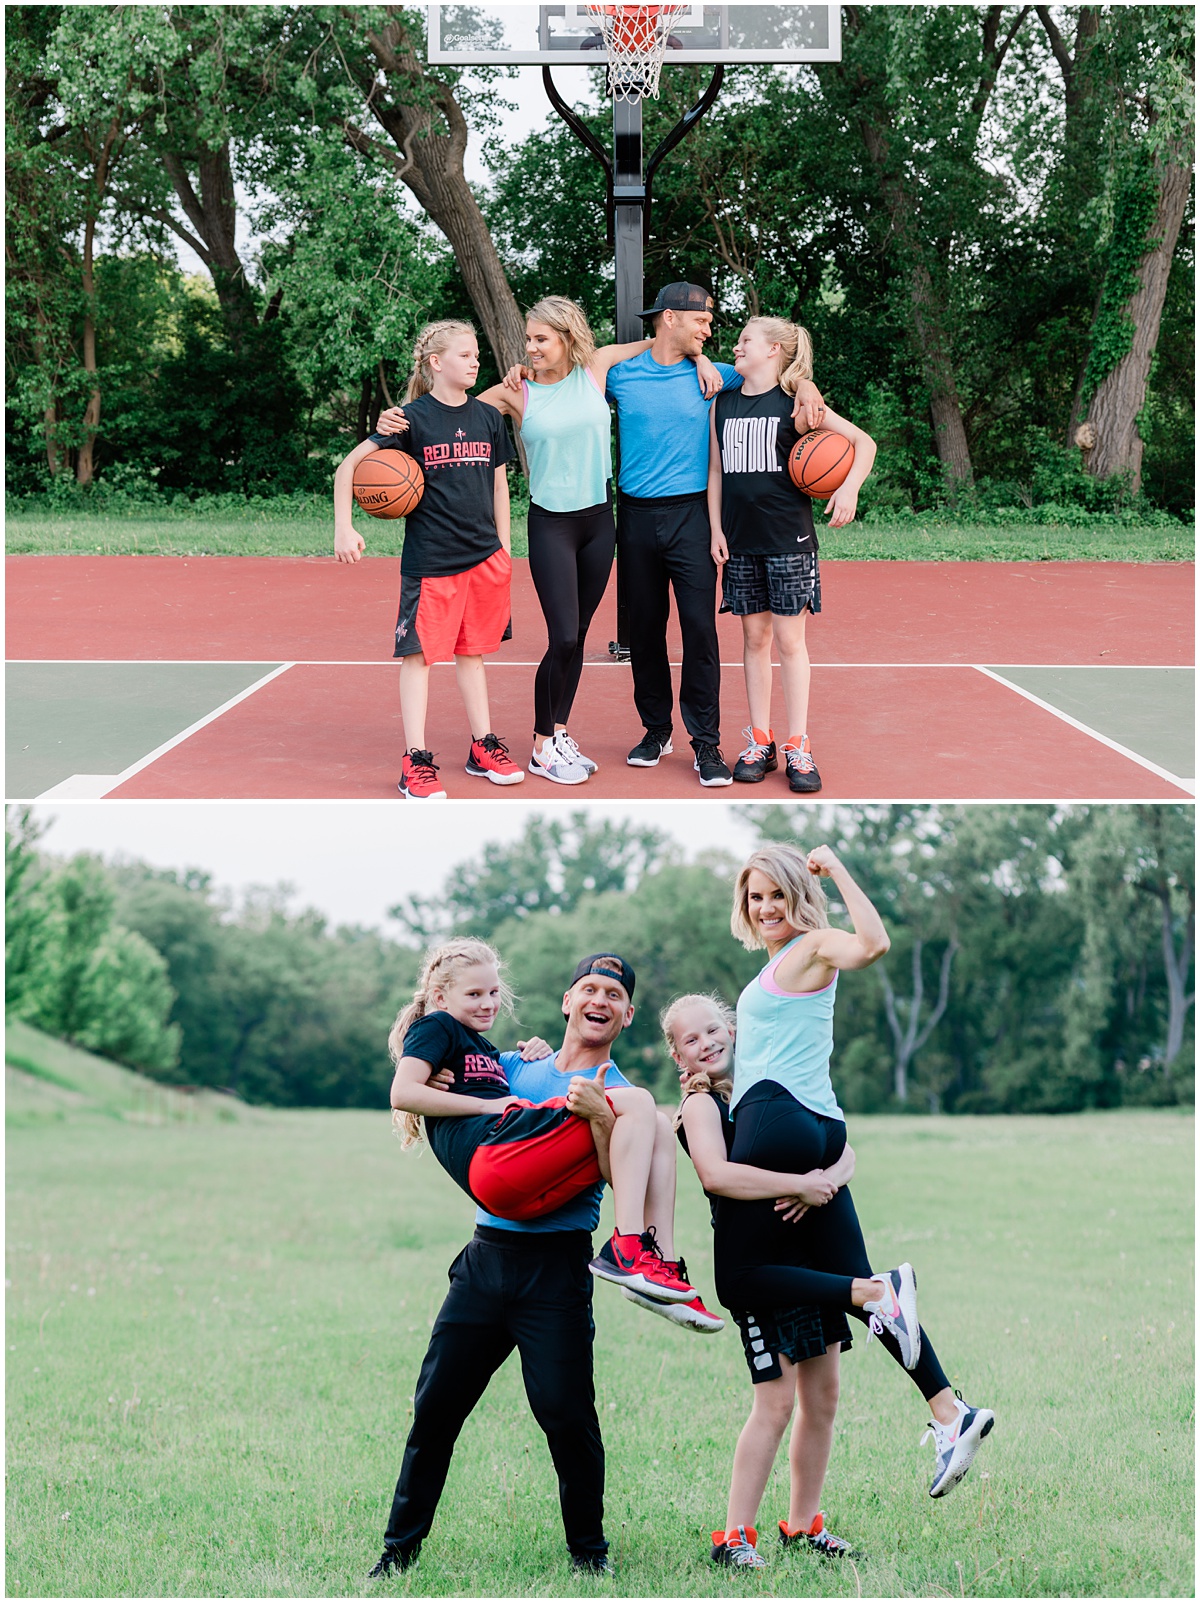 funny family photos of a mom and dad with their two teen daughters, playing basketball and then flexing for the camera